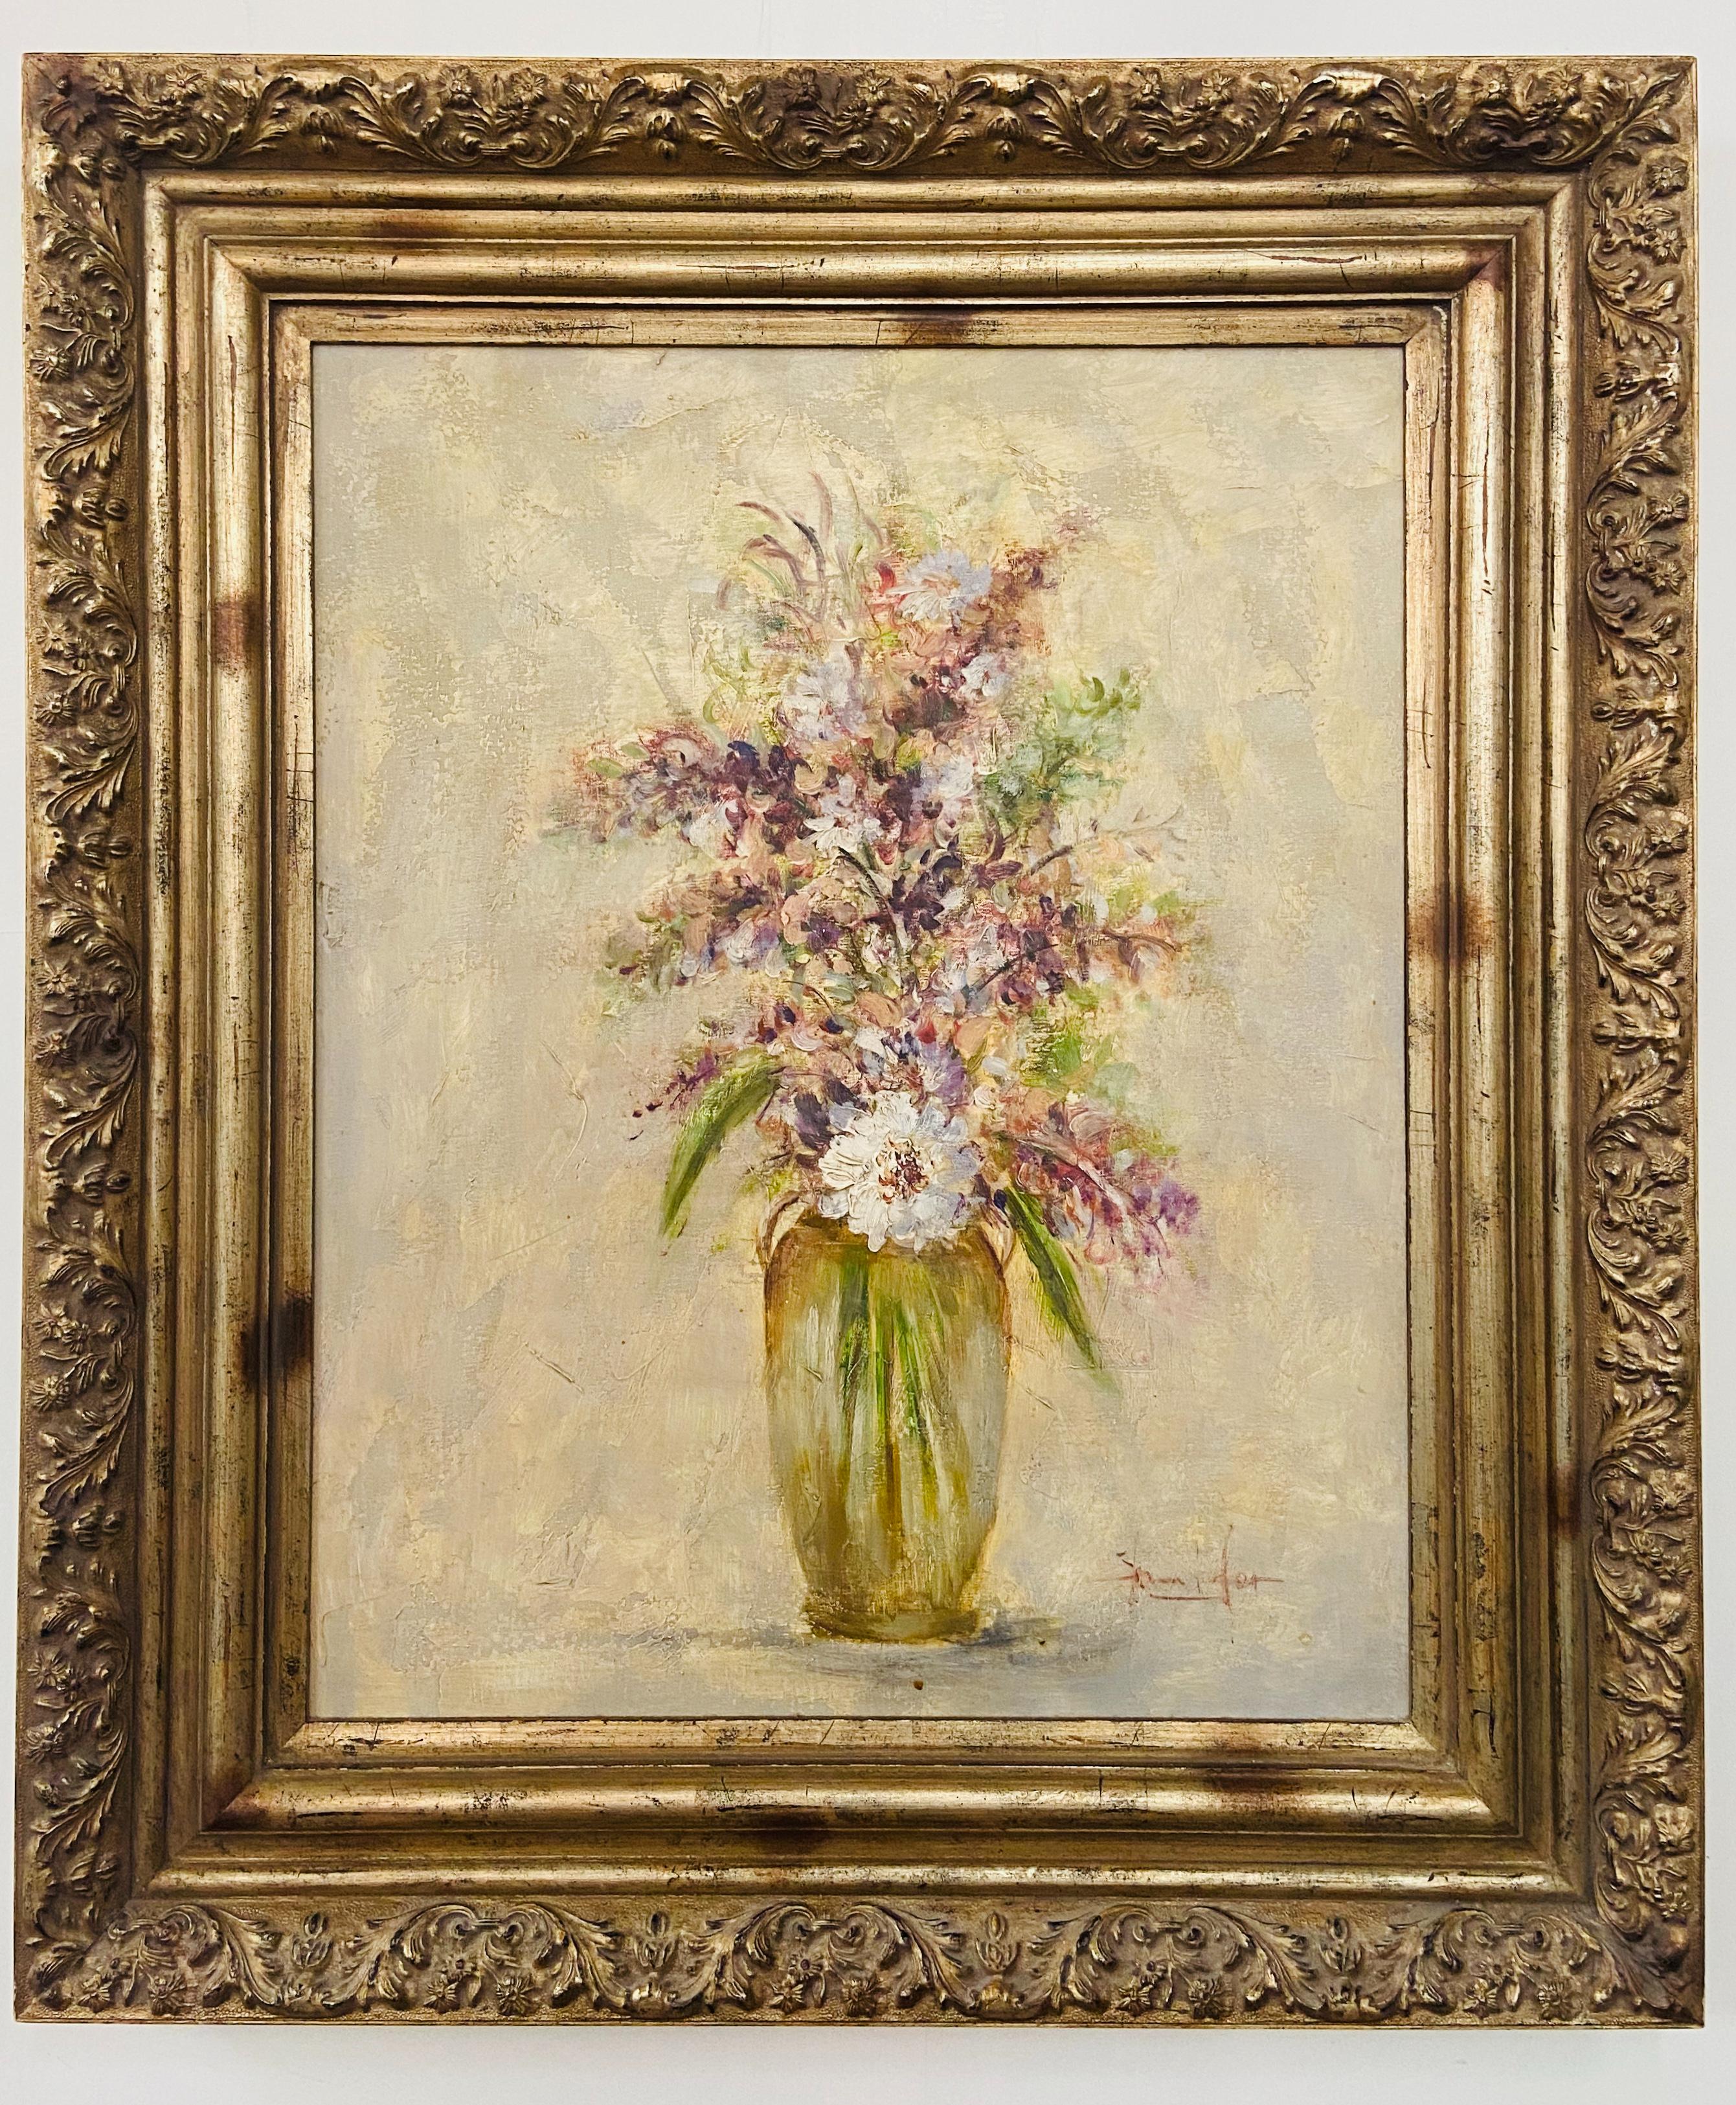 A gorgeous oil on canvas painting in a pastel tone depicting a vase with white flowers and lavenders in a vase. The painting is beautifully framed in a custom gilt carved wood frame and is signed by artist Jennifer. 

Dimensions: 40.5